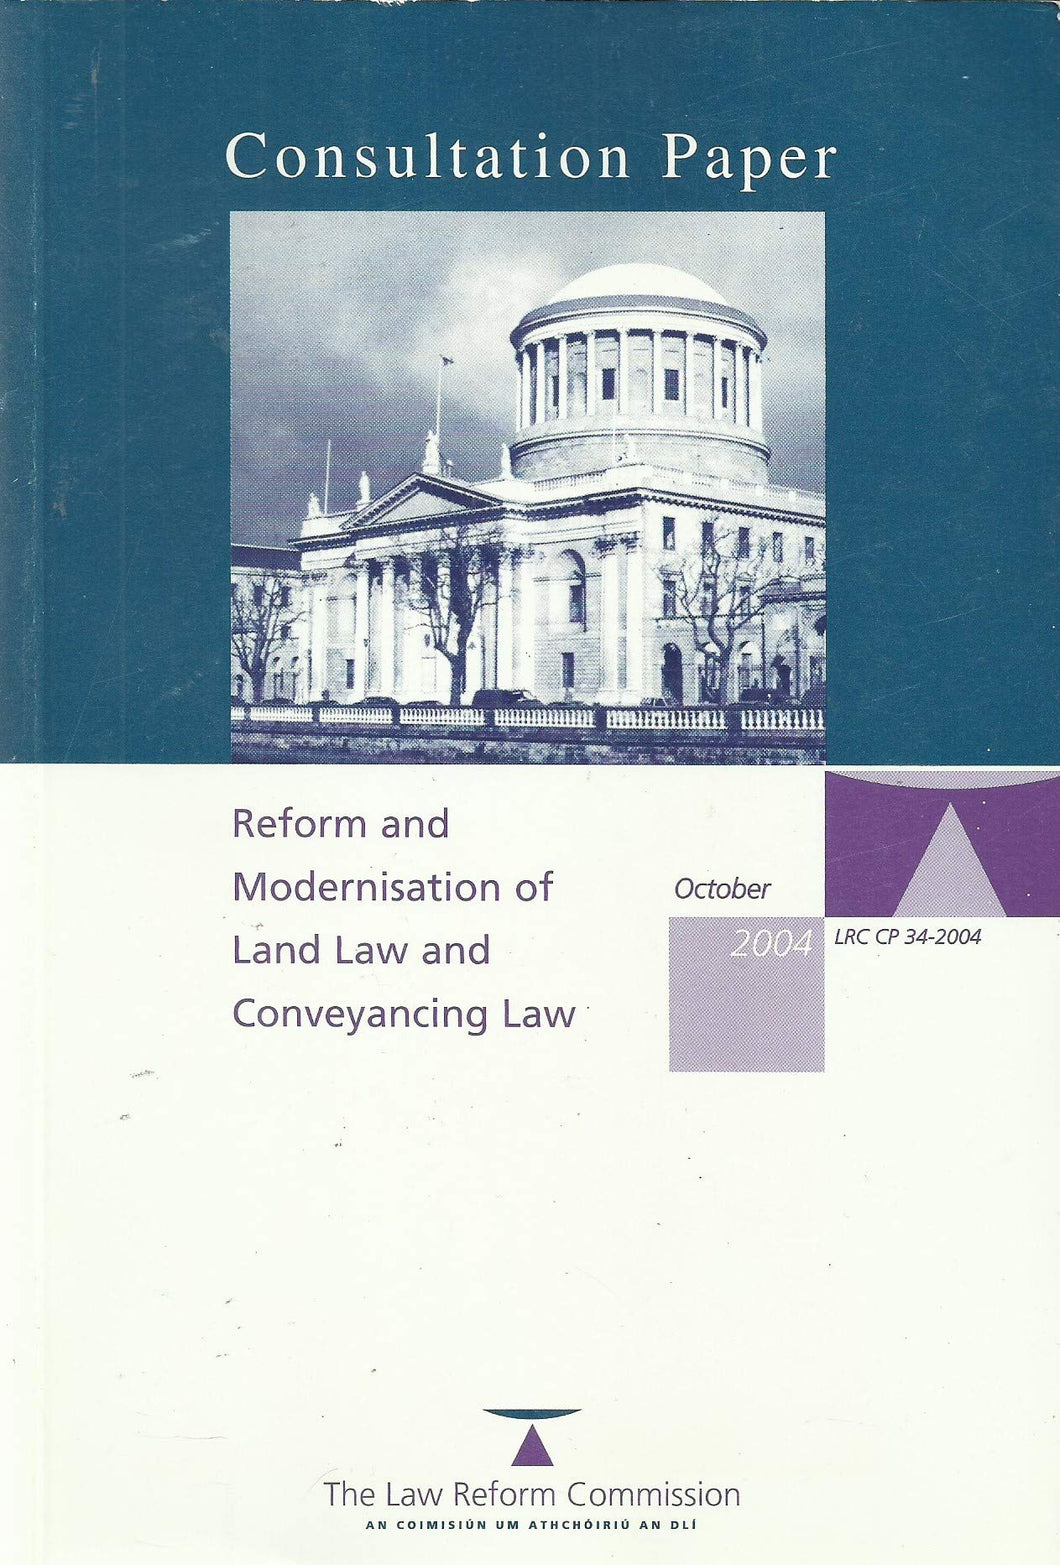 Reform and Modernisation of Land Law and Conveyancing Law - Consultation Paper, October 2004 (LRC CP 34-2004)